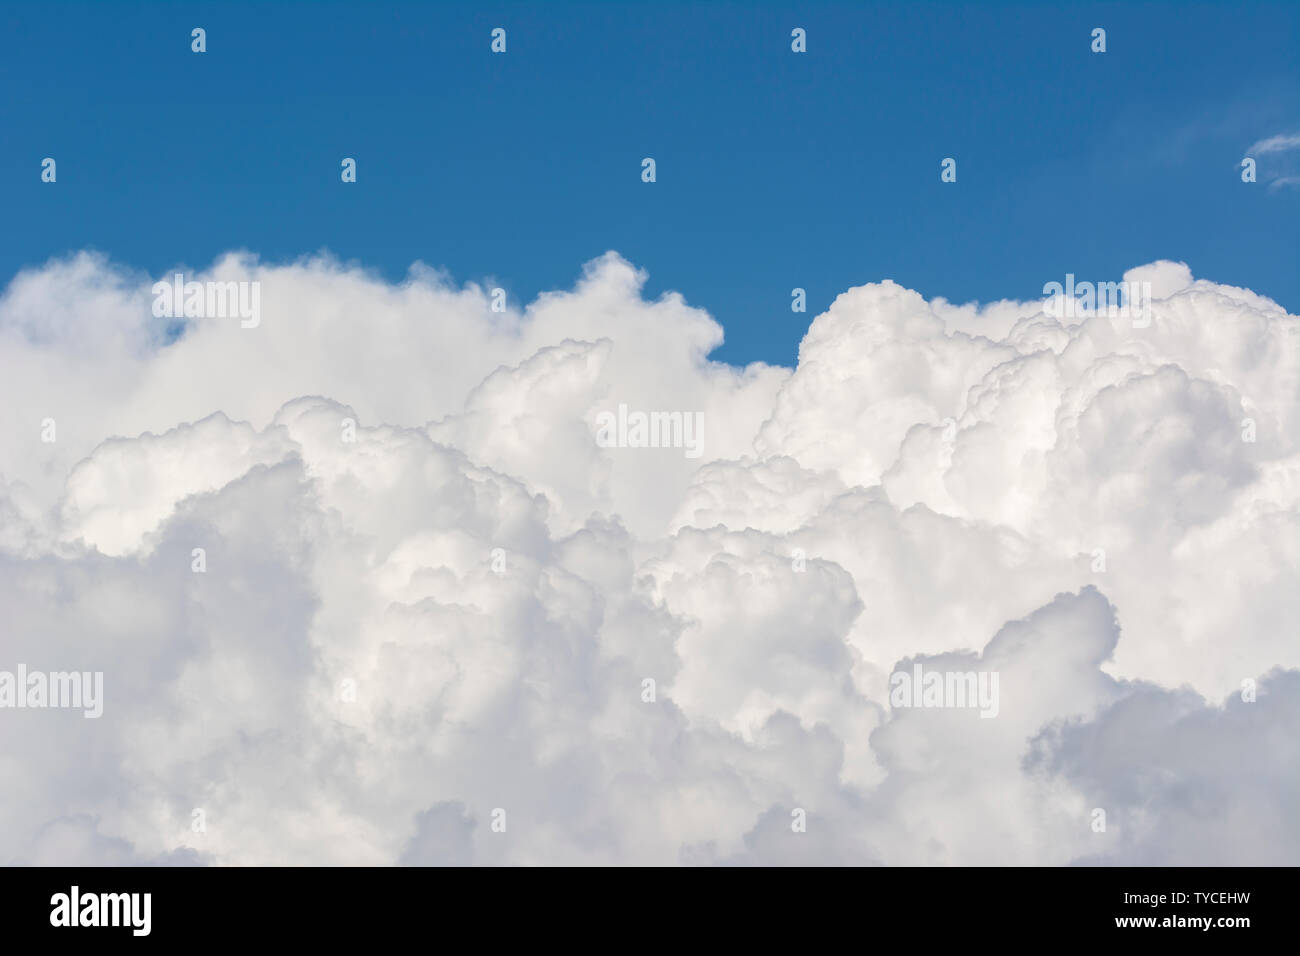 Clouds background cumulonimbus cloud formations before the storm Stock Photo